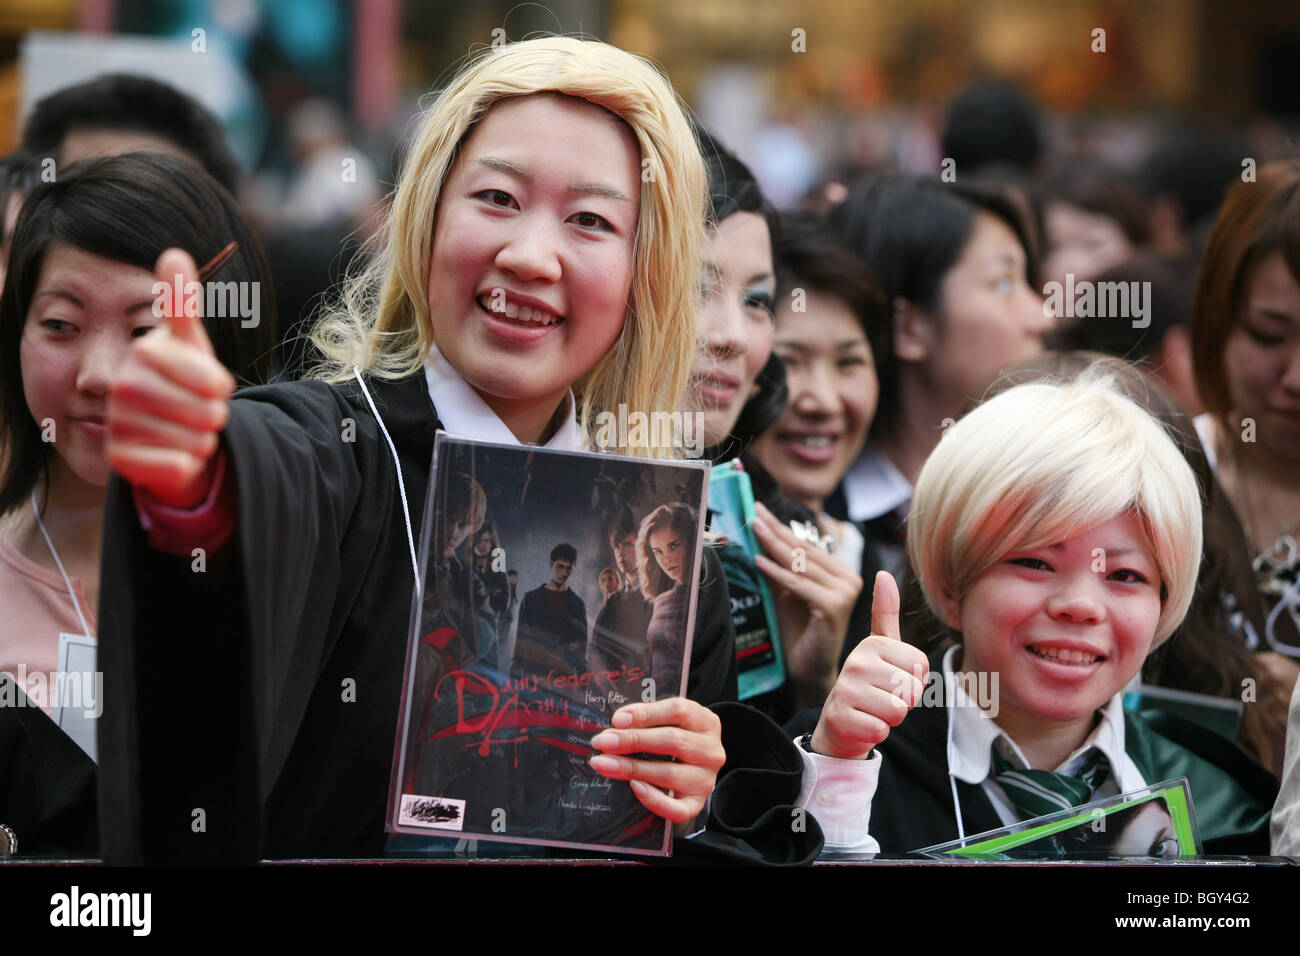 Japanese fans at the red carpet premiere of the 5th Harry Potter movie, 'Harry Potter and the Order of the Phoenix'. Stock Photo